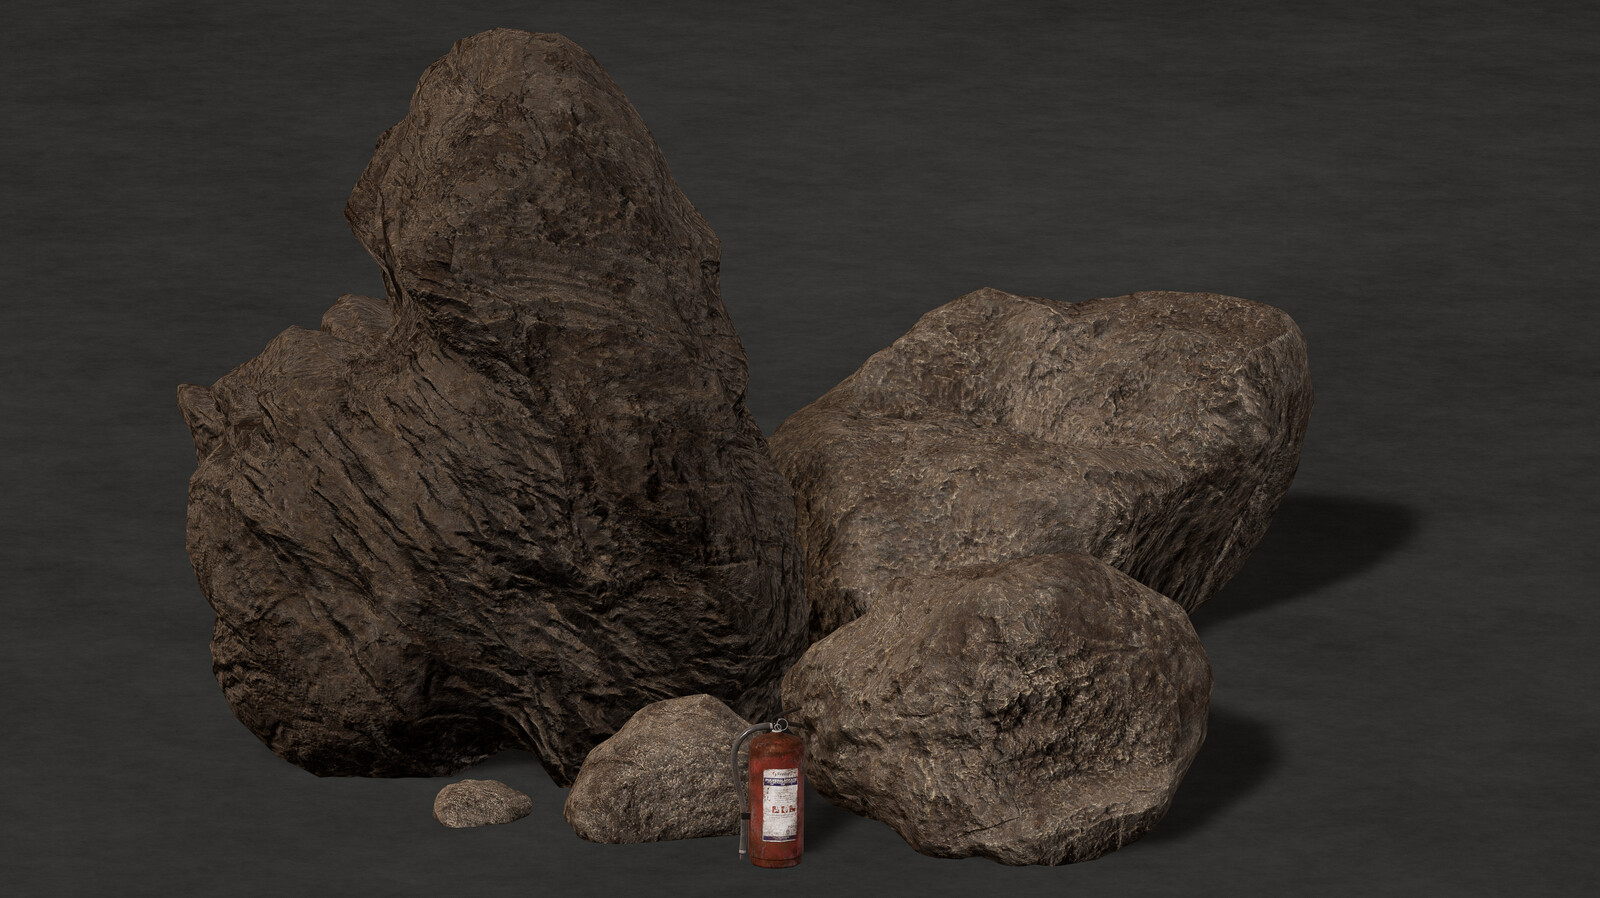 Some Rocks and fire extinguisher for scale.